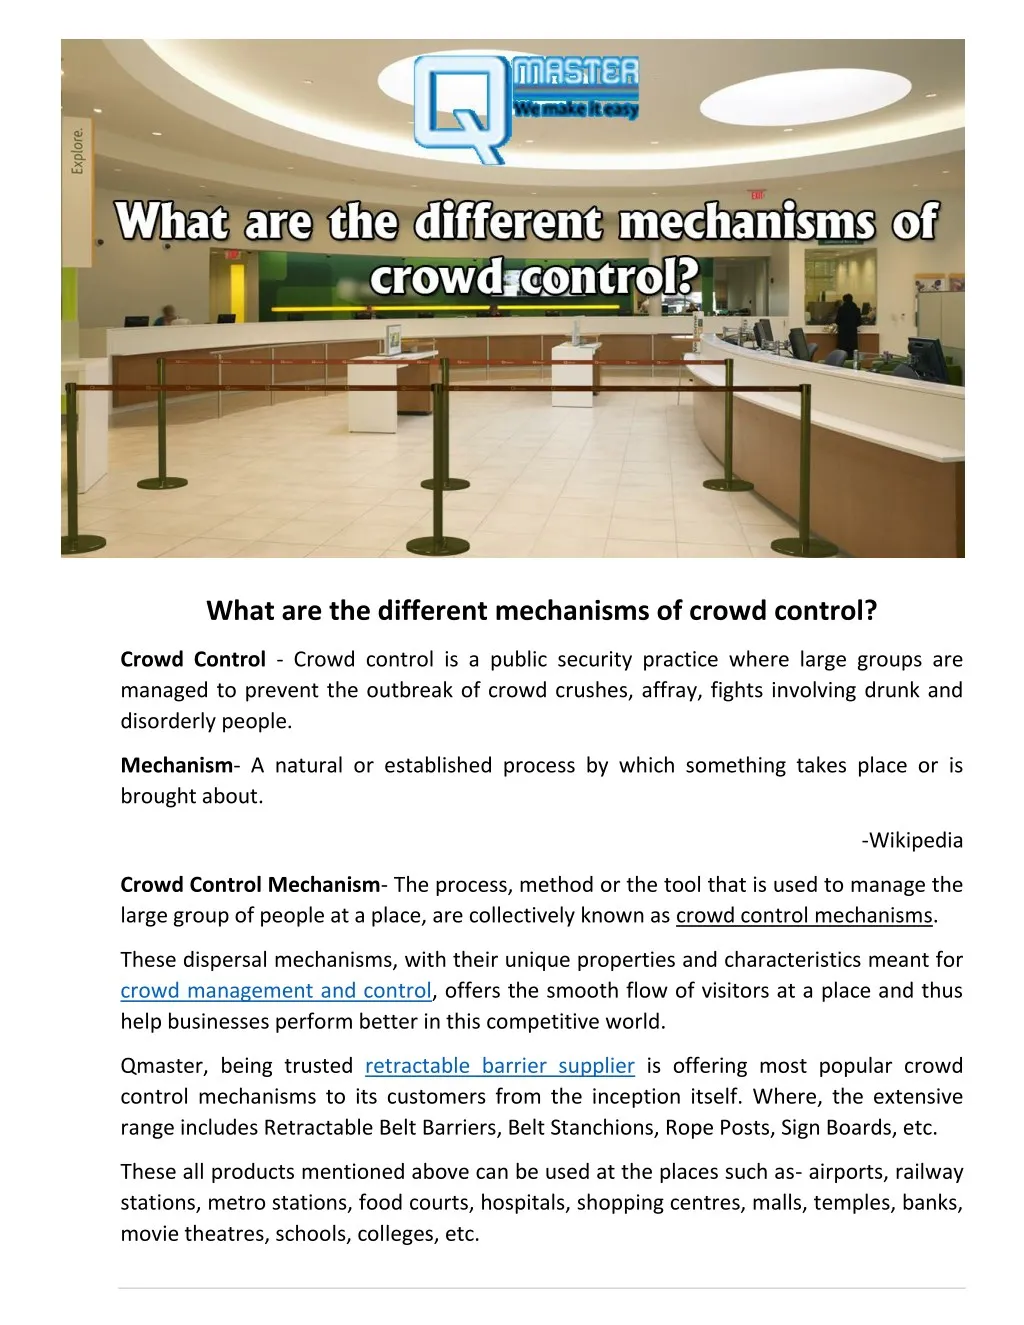 what are the different mechanisms of crowd control